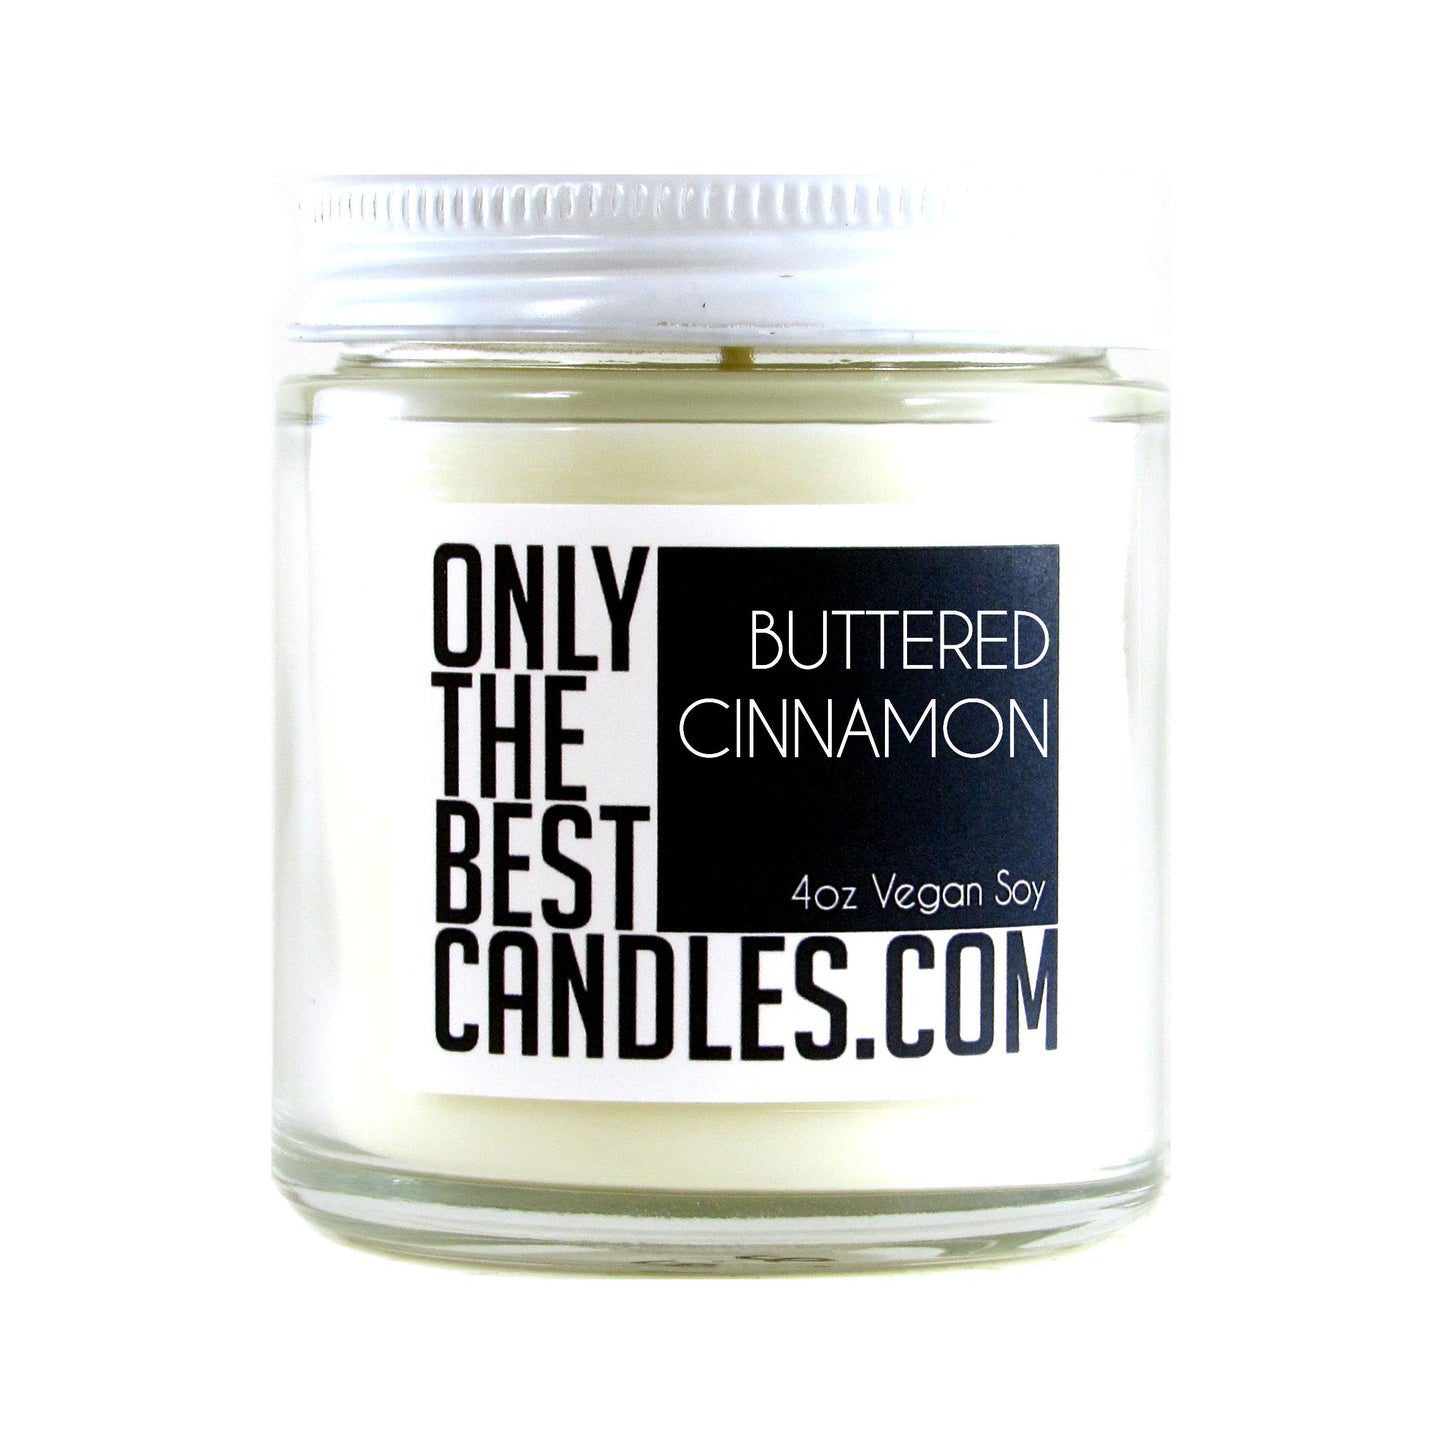 Buttered Cinnamon 4oz Candle